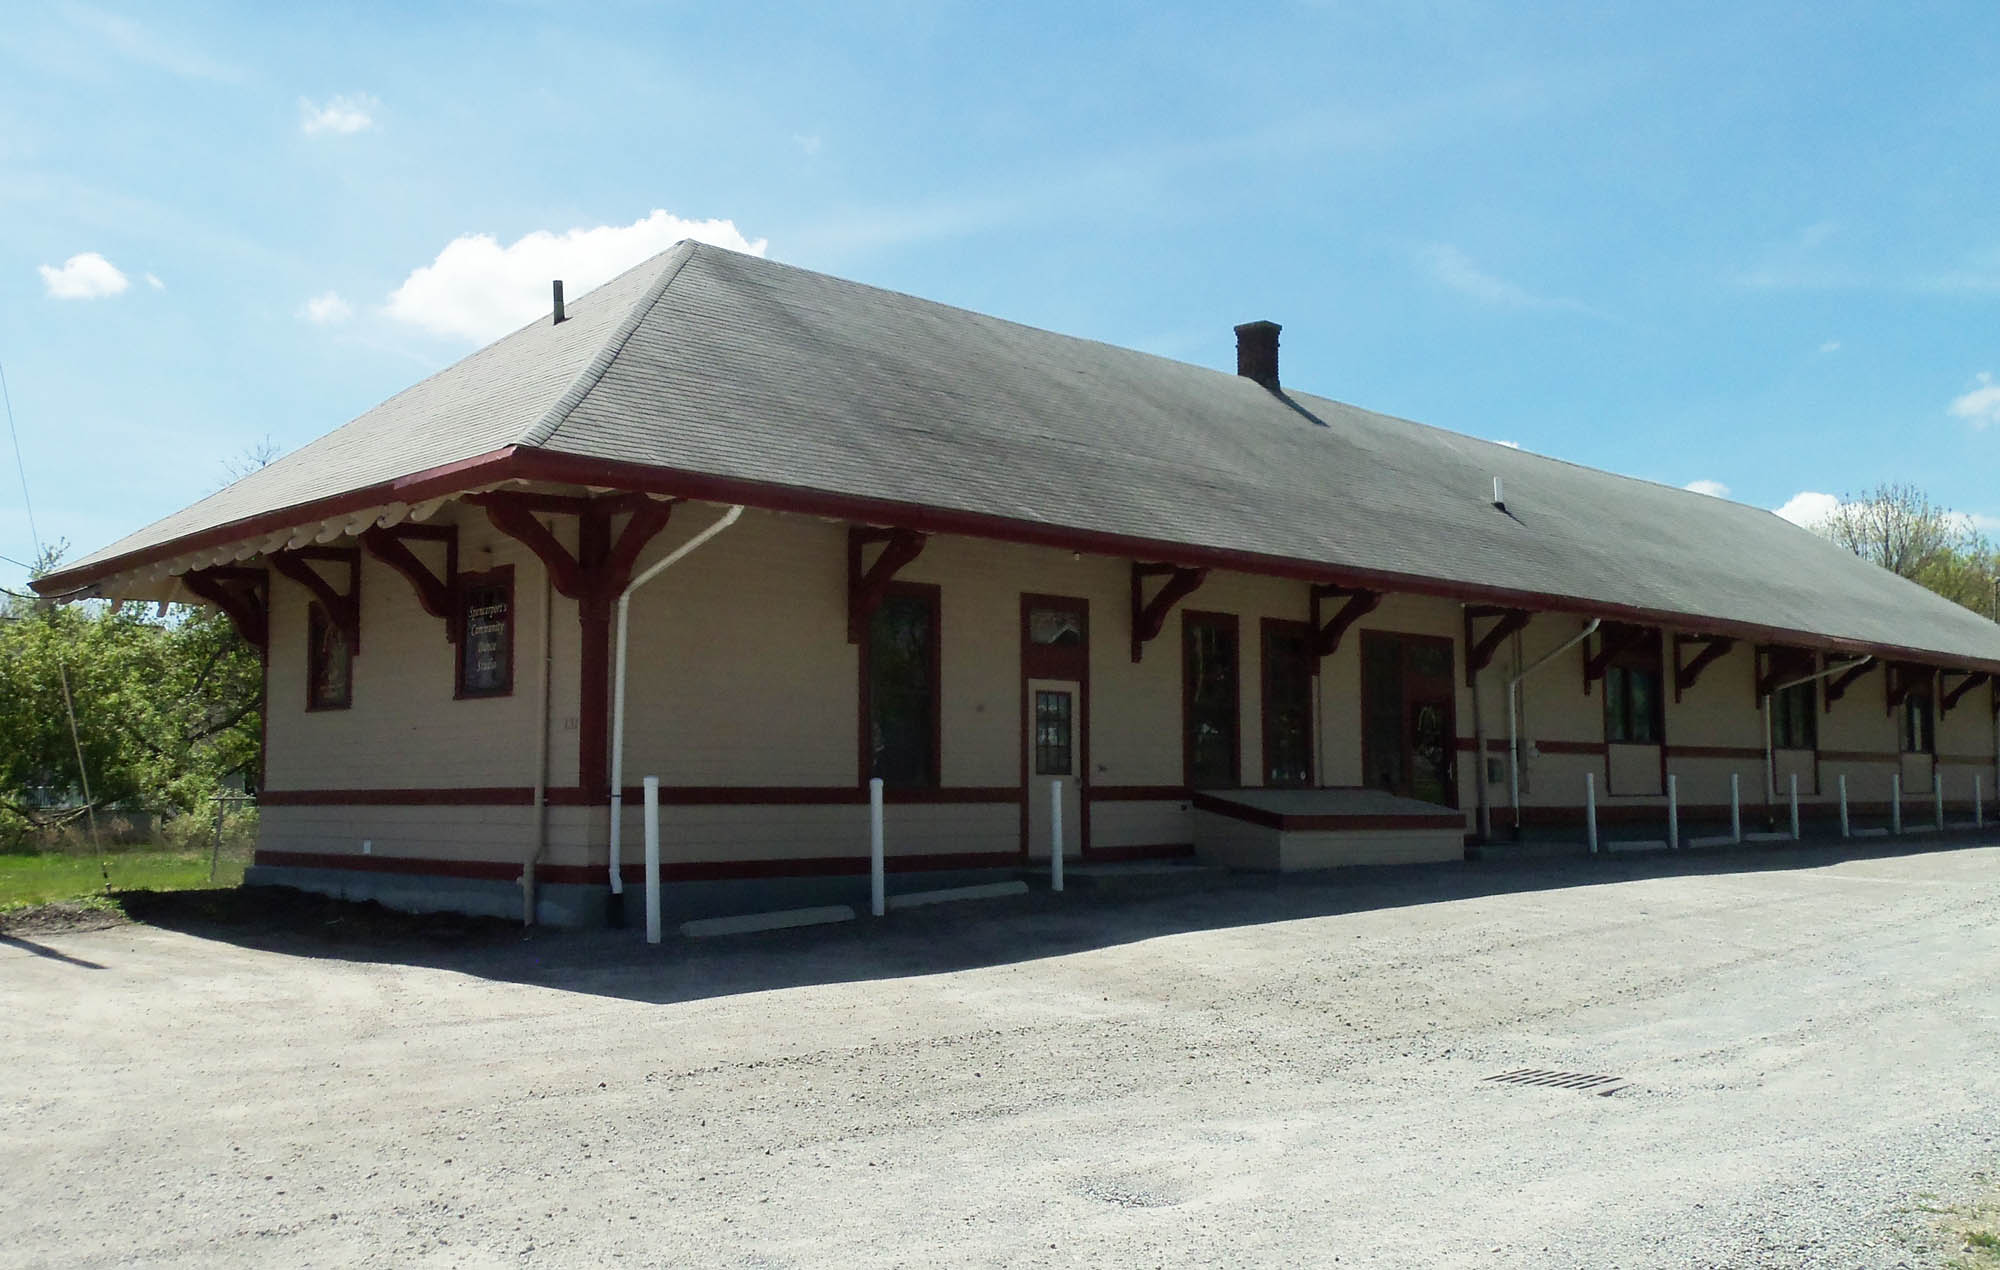 Former Railroad Station (north view), Spencerport